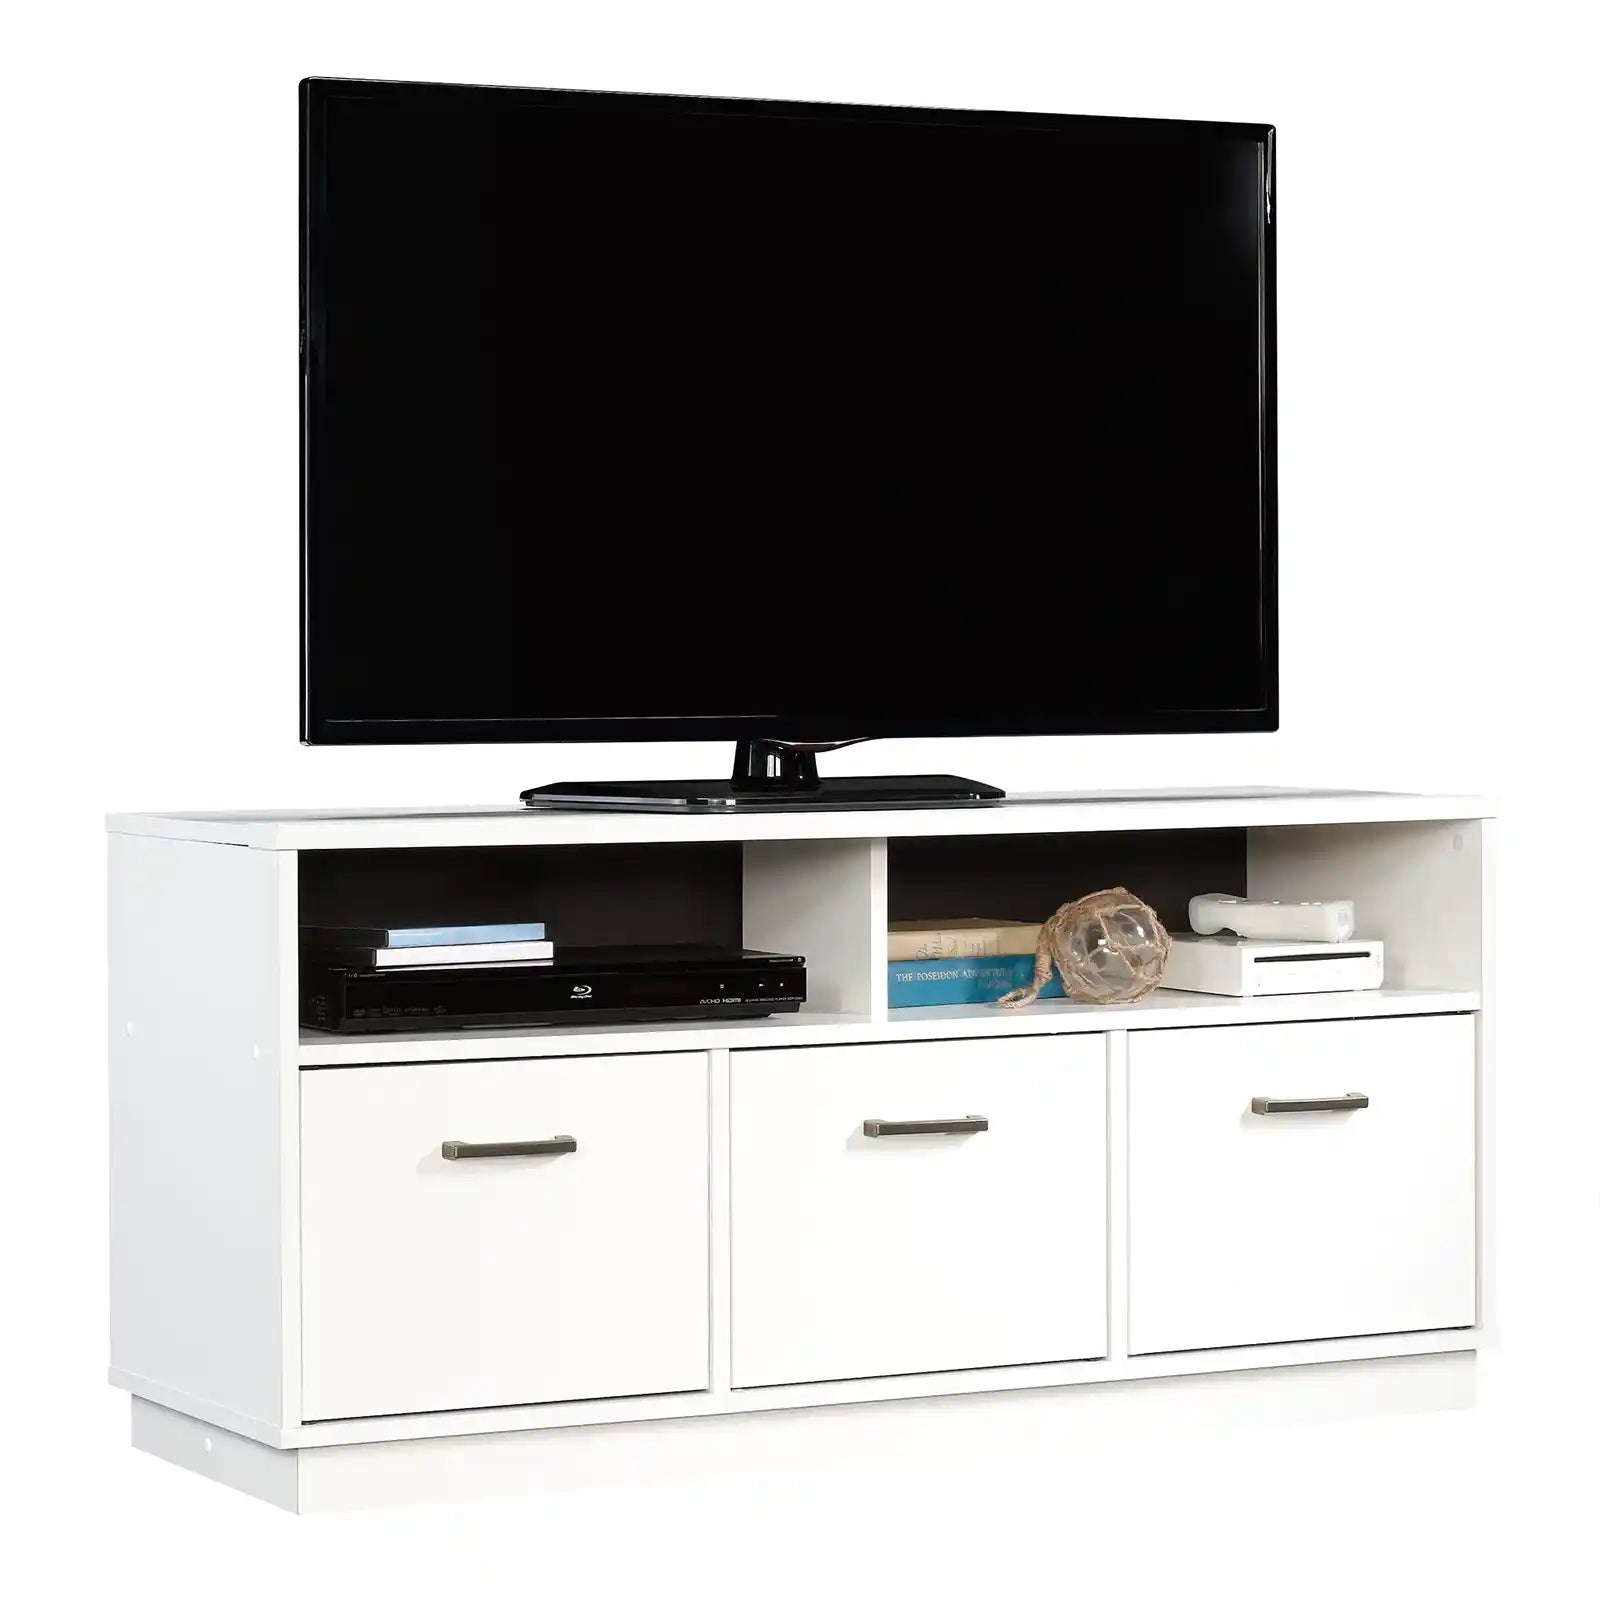 3-Door TV Stand Console for TVs up to 50"